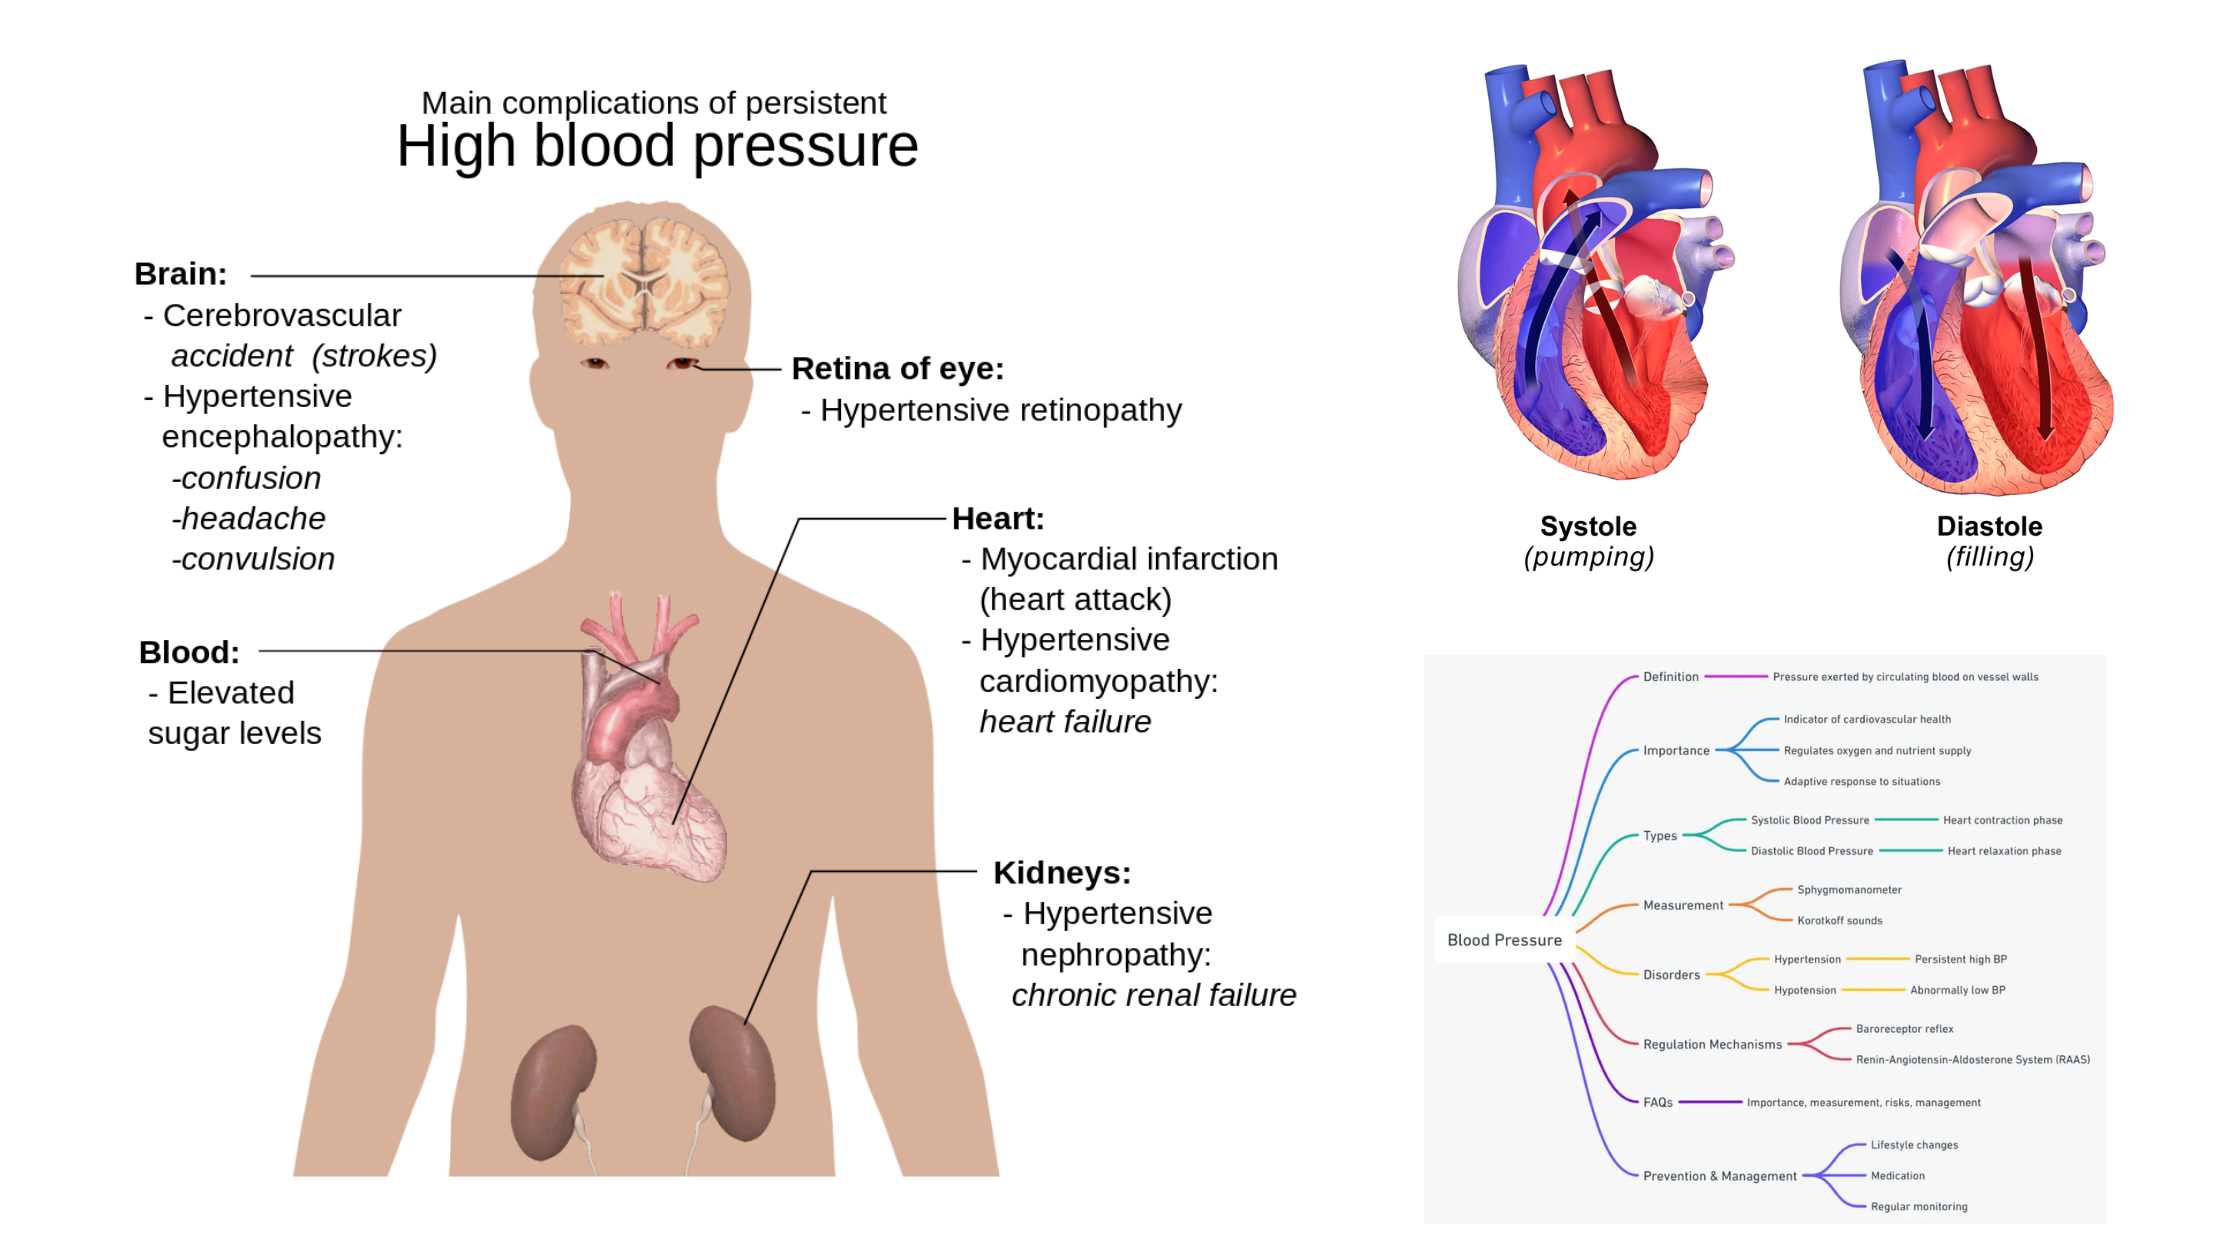 Blood Pressure - Definition, Types, Measurement, Disorders